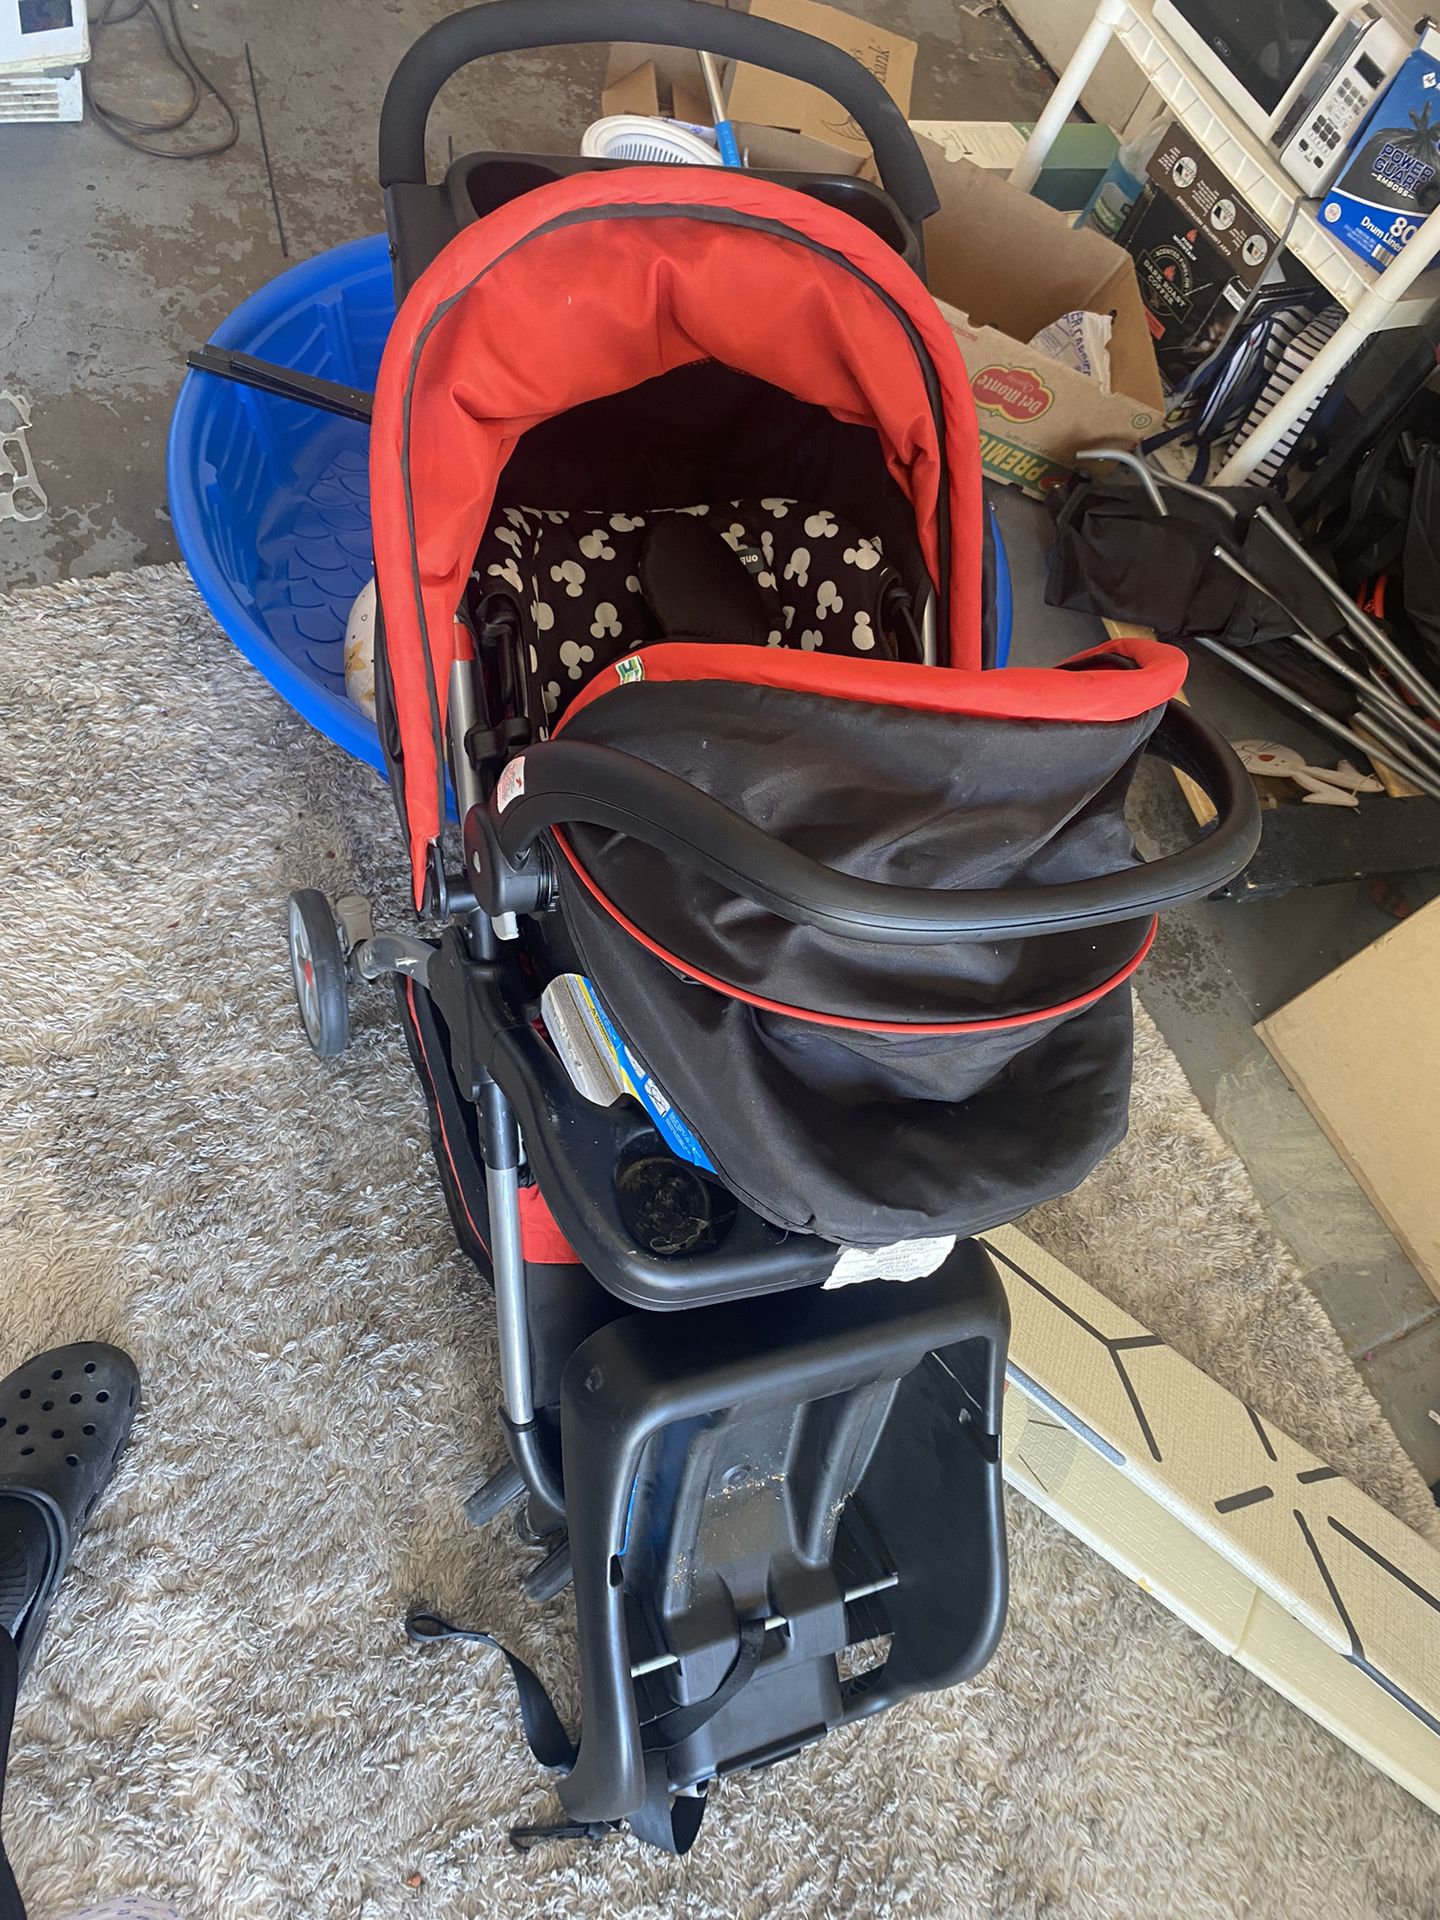 Infant Car Seat And Stroller Combo 